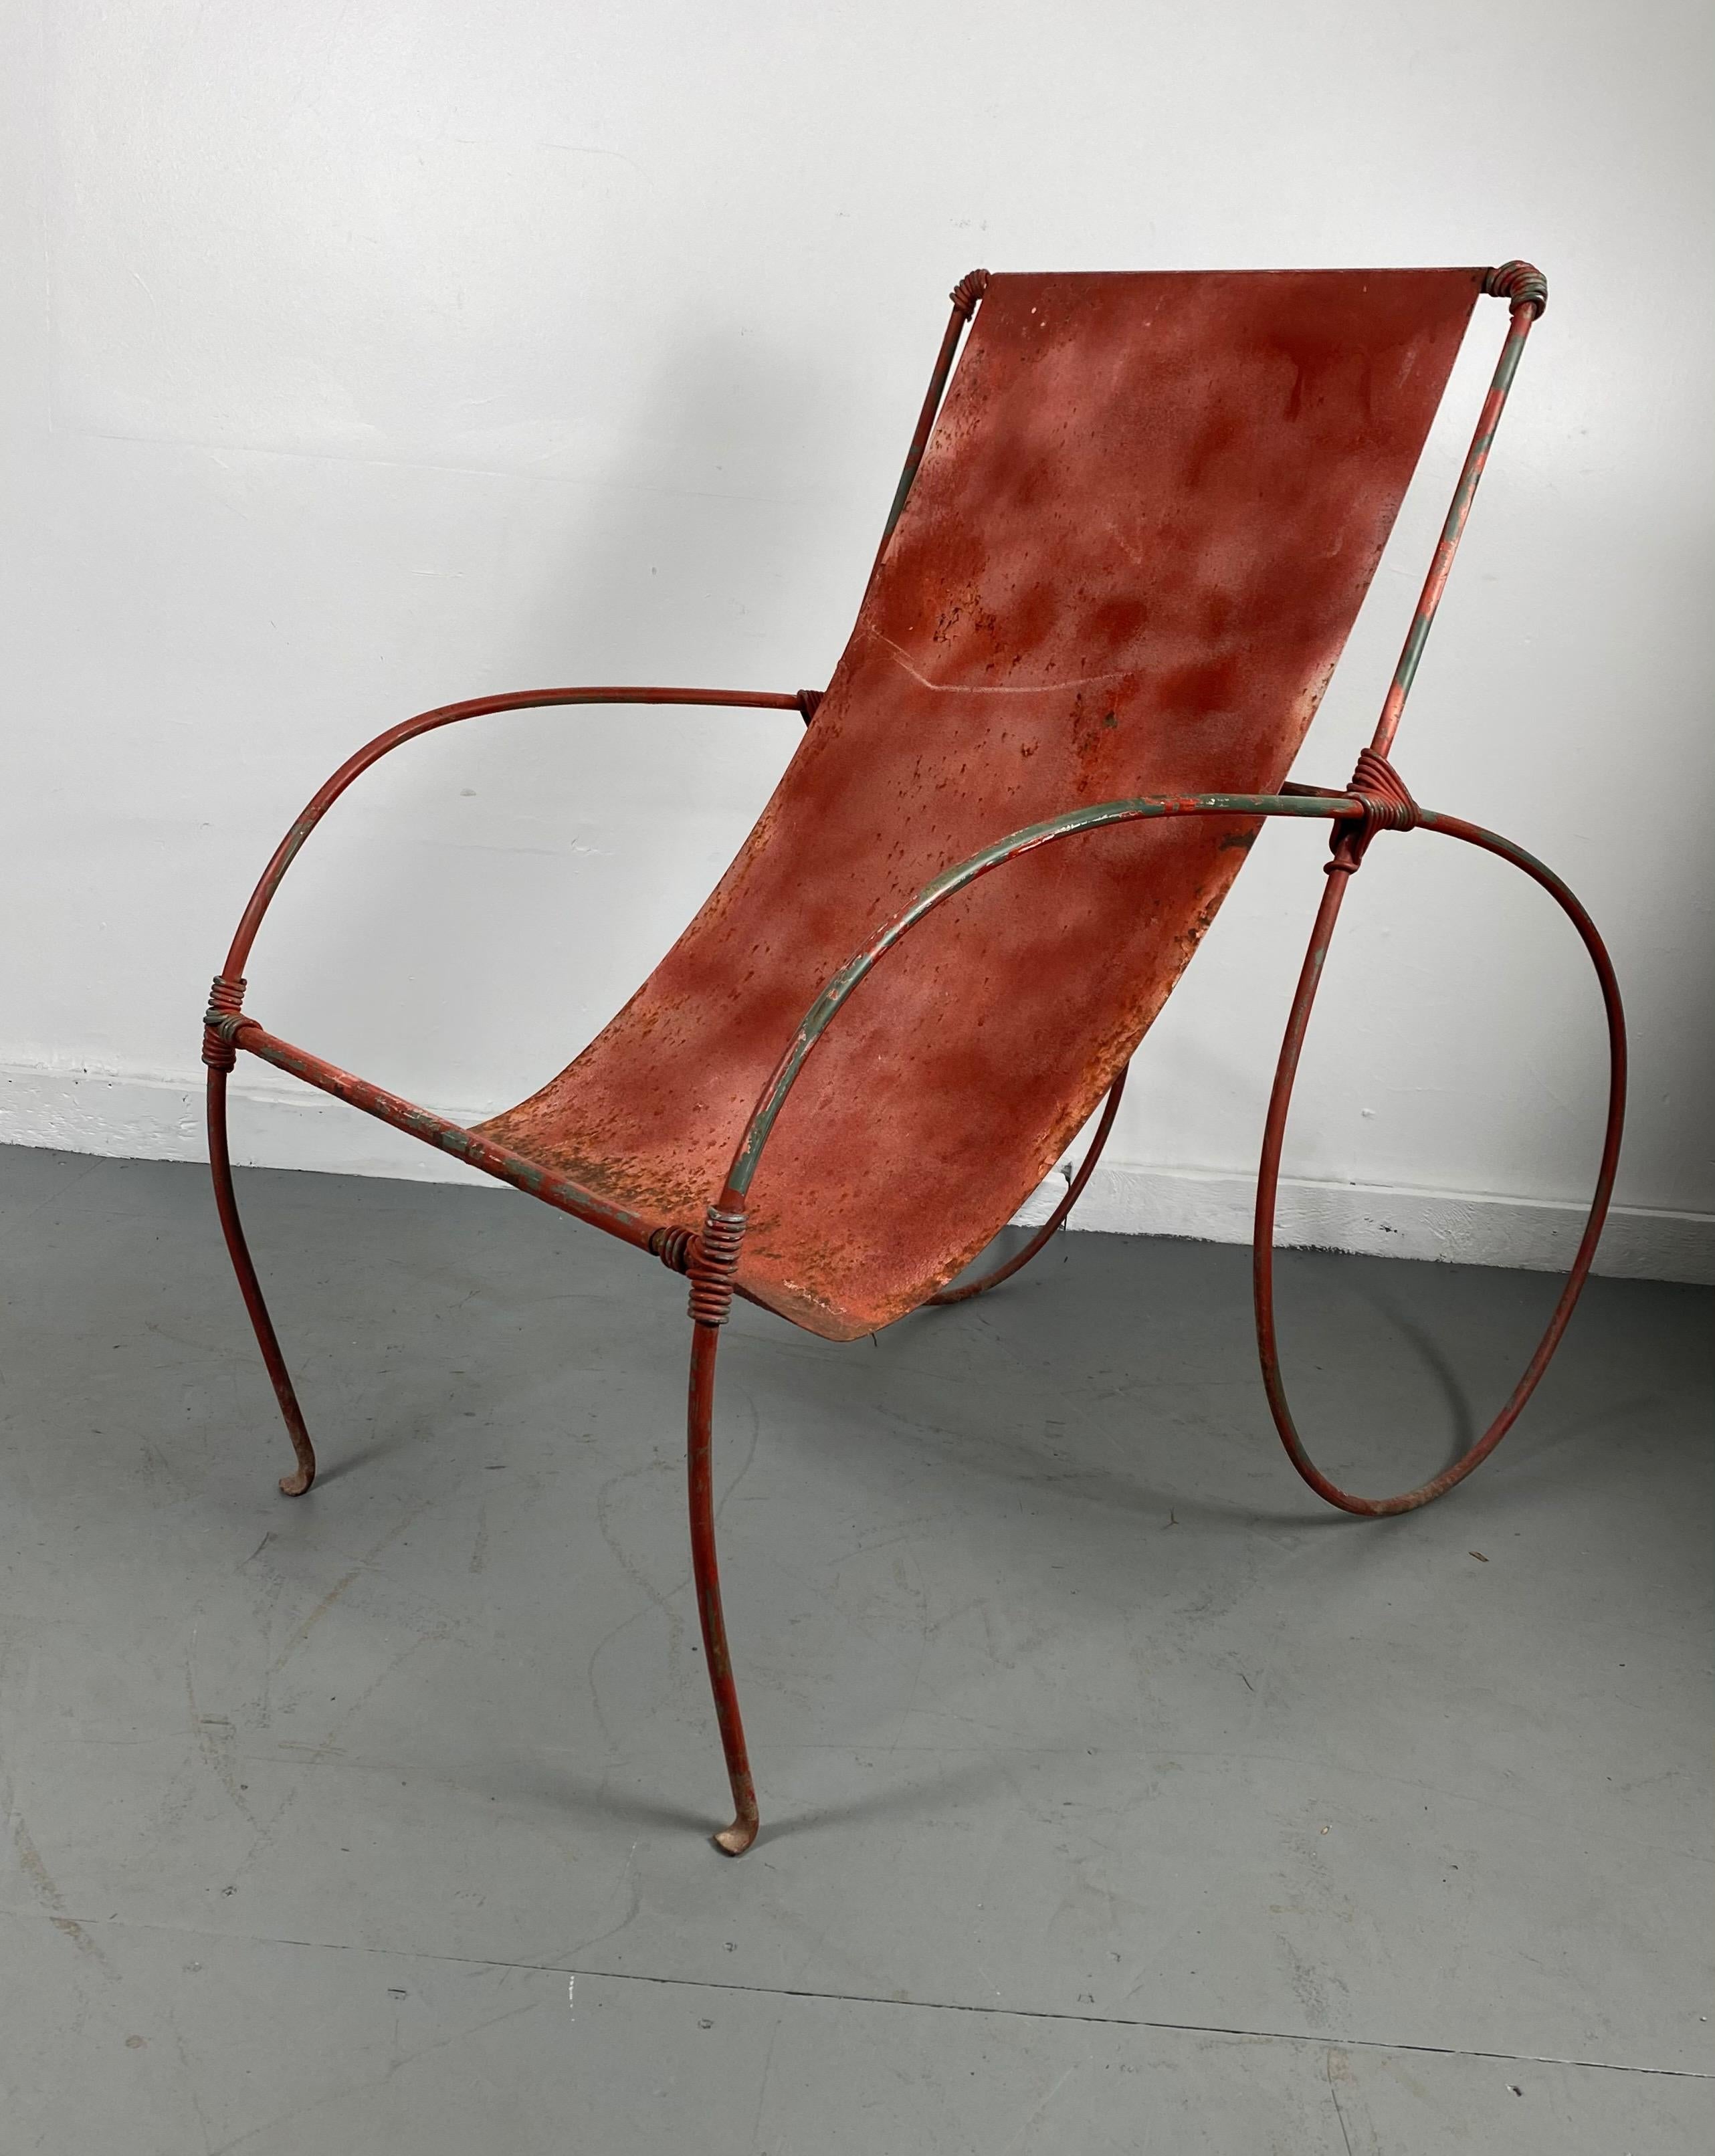 Metal Unusual Sculptural Iron Garden Lounge Chair Manner of Jean-Charles Moreux For Sale